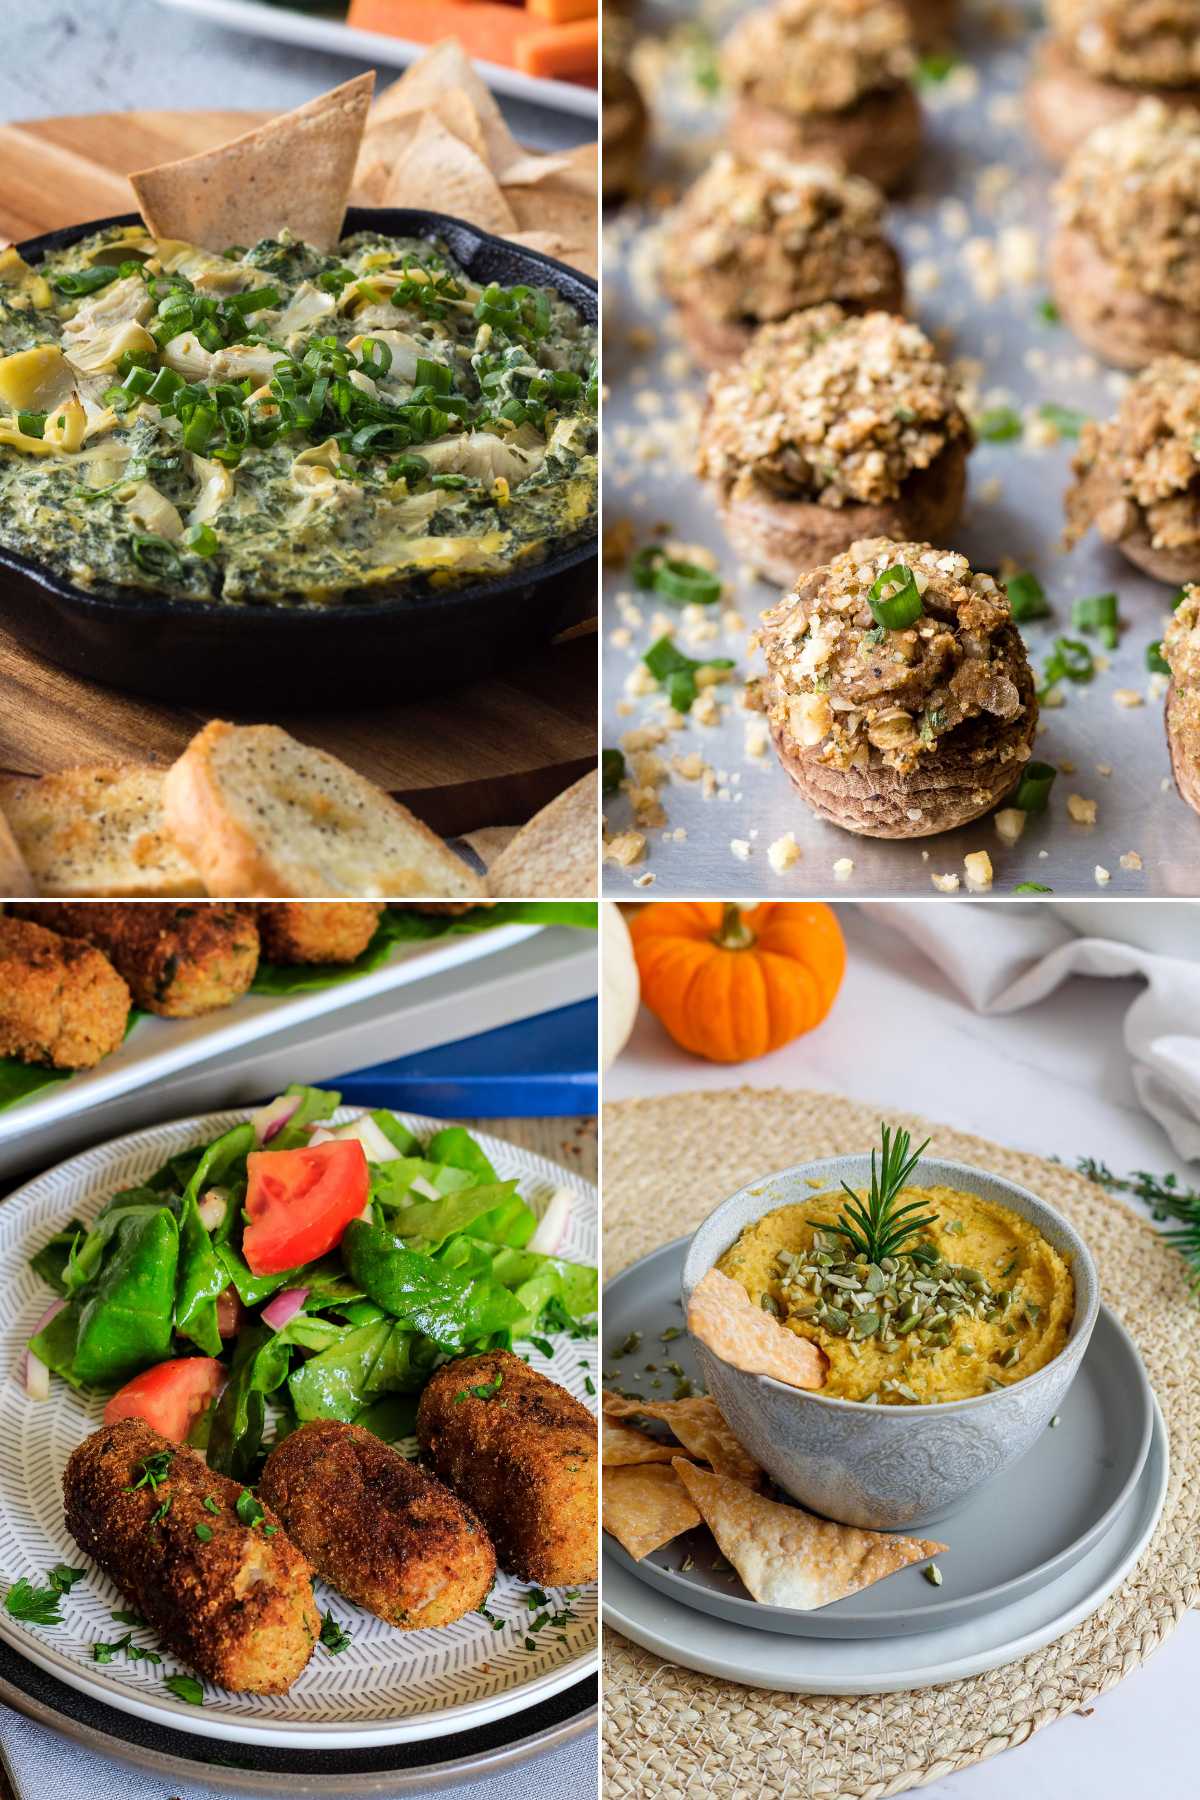 Vegetarian holiday recipes photo collage of four appetizer recipes including spinach dip, stuffed mushrooms, croquettes, and pumpkin dip.